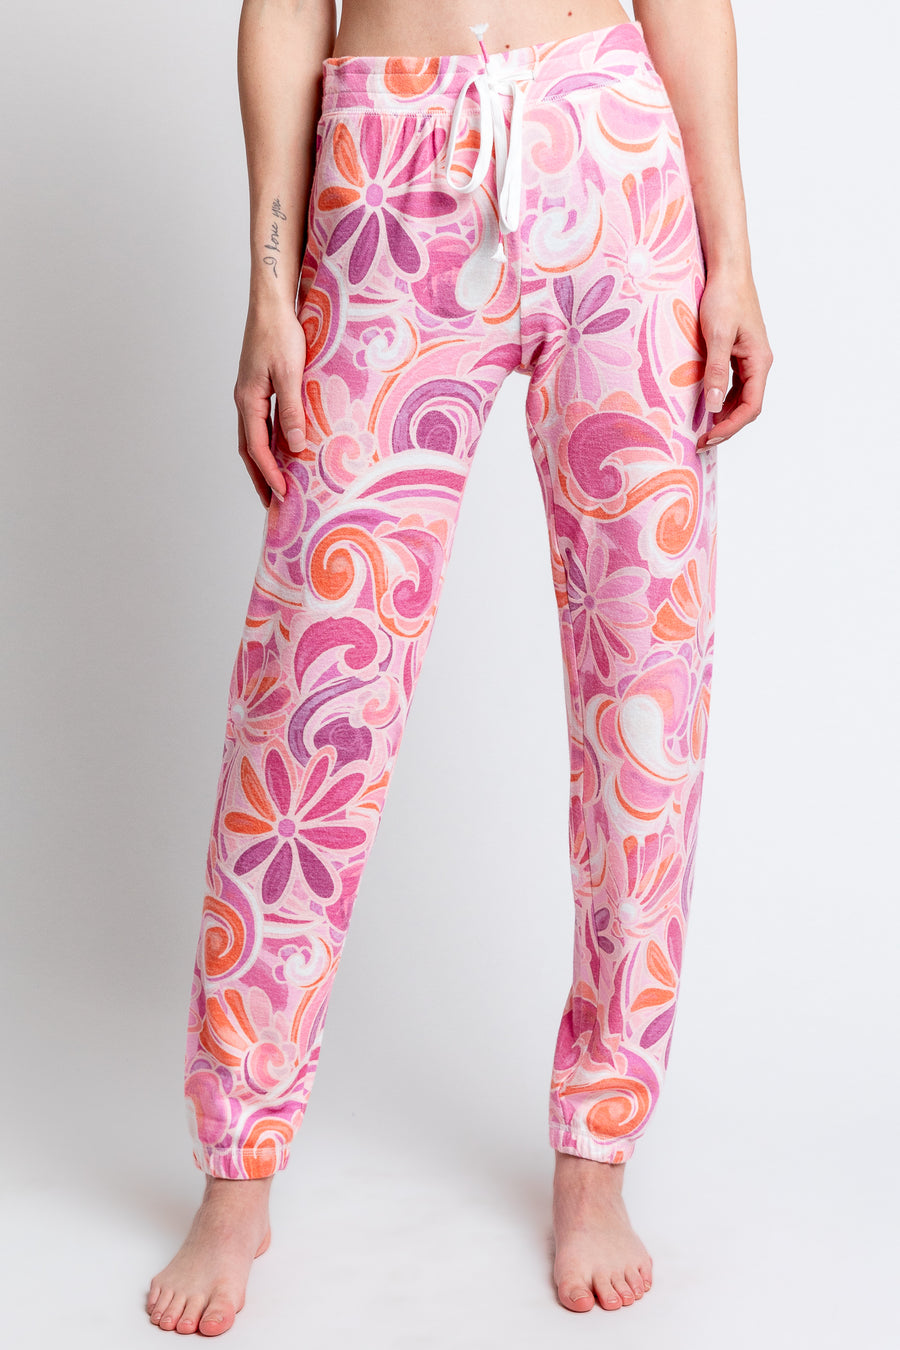 PJ Salvage Stay Groovy Band Pant in Pink Sky